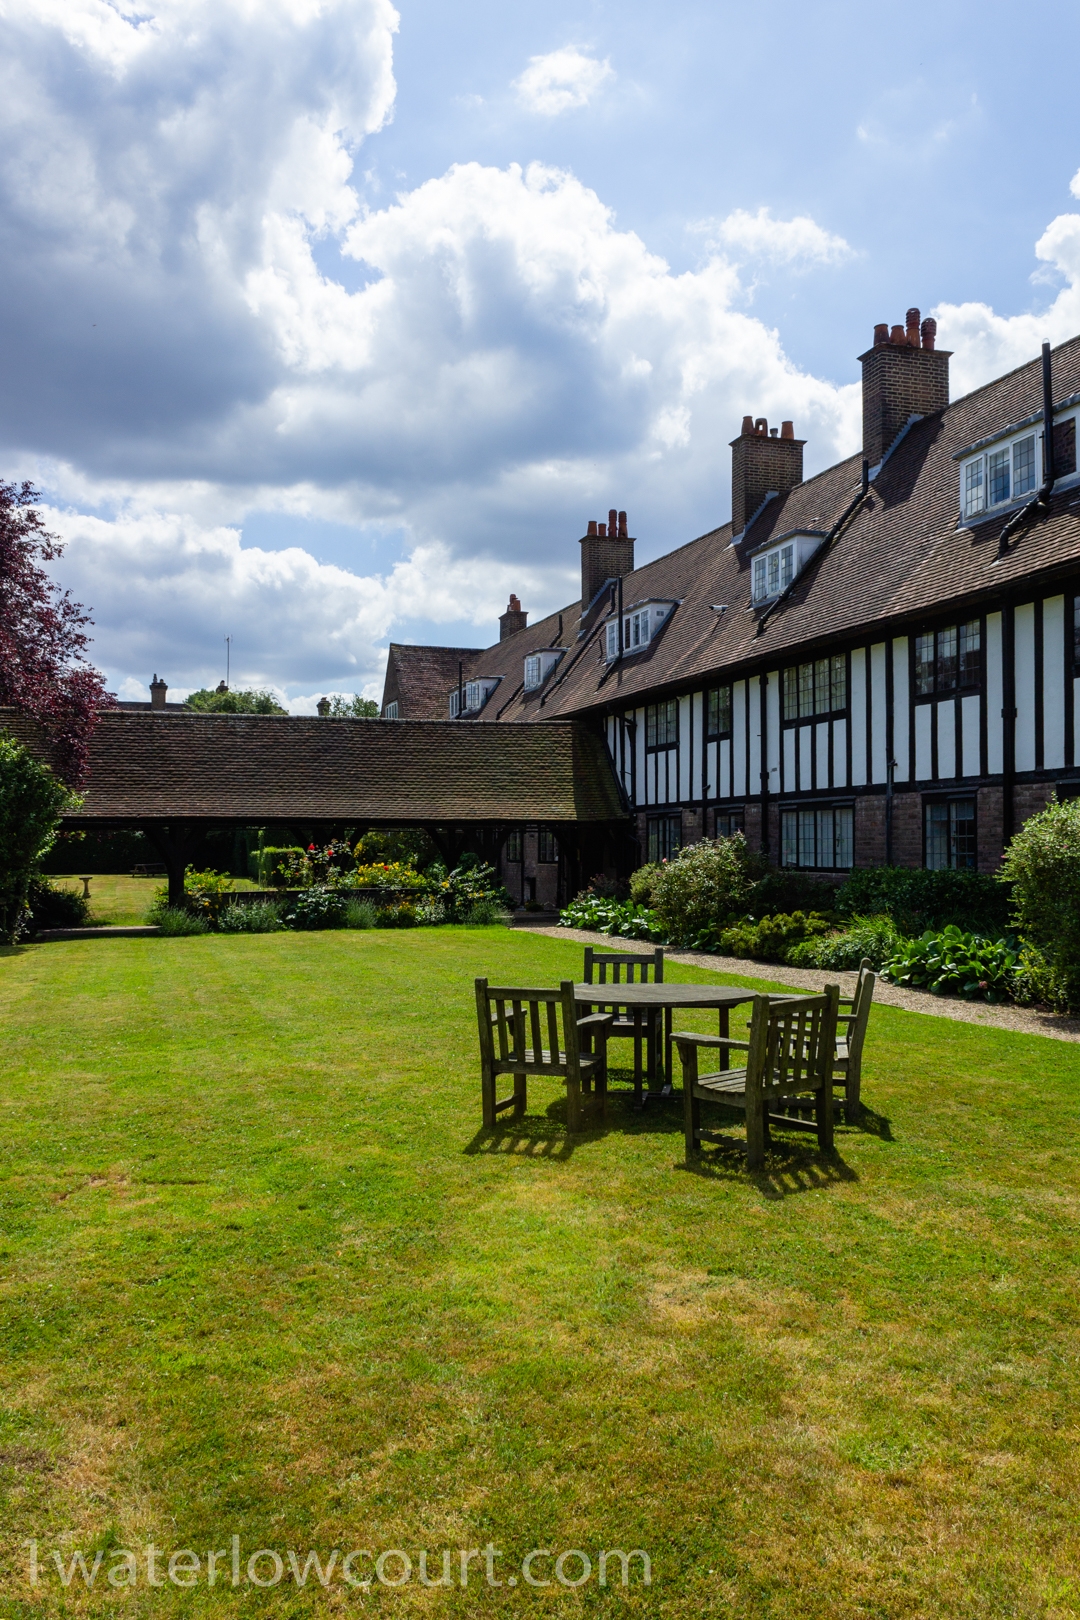 North-east garden of Waterlow Court, an Arts & Crafts Grade II* listed building, Hampstead Garden Suburb, London NW11 7DT. Flat 1 is a one-bedroom, ground-floor flat, and is for sale. Listed on Rightmove and Zoopla.